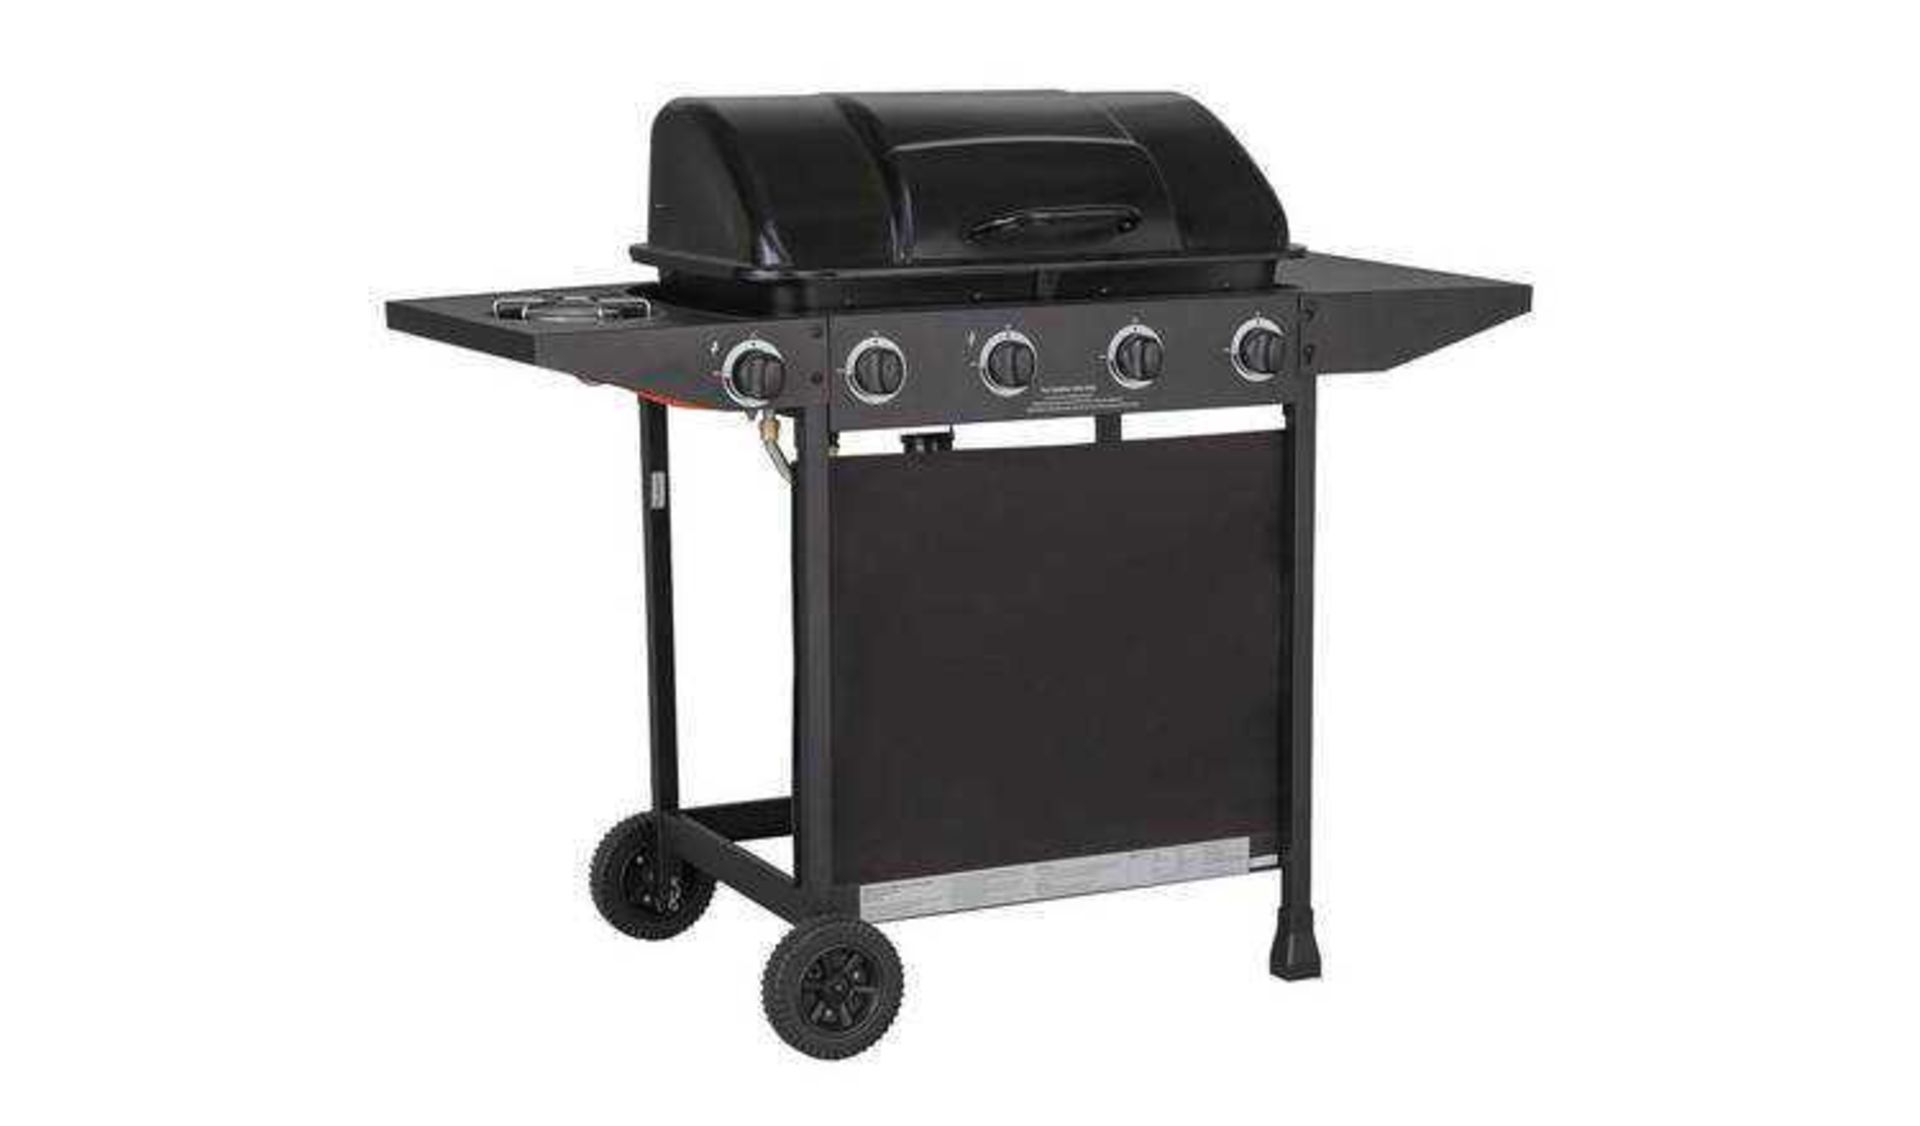 Rrp £200 Boxed Uniflame 4-Burner Propane Gas Grill With Side Burner - Image 2 of 2